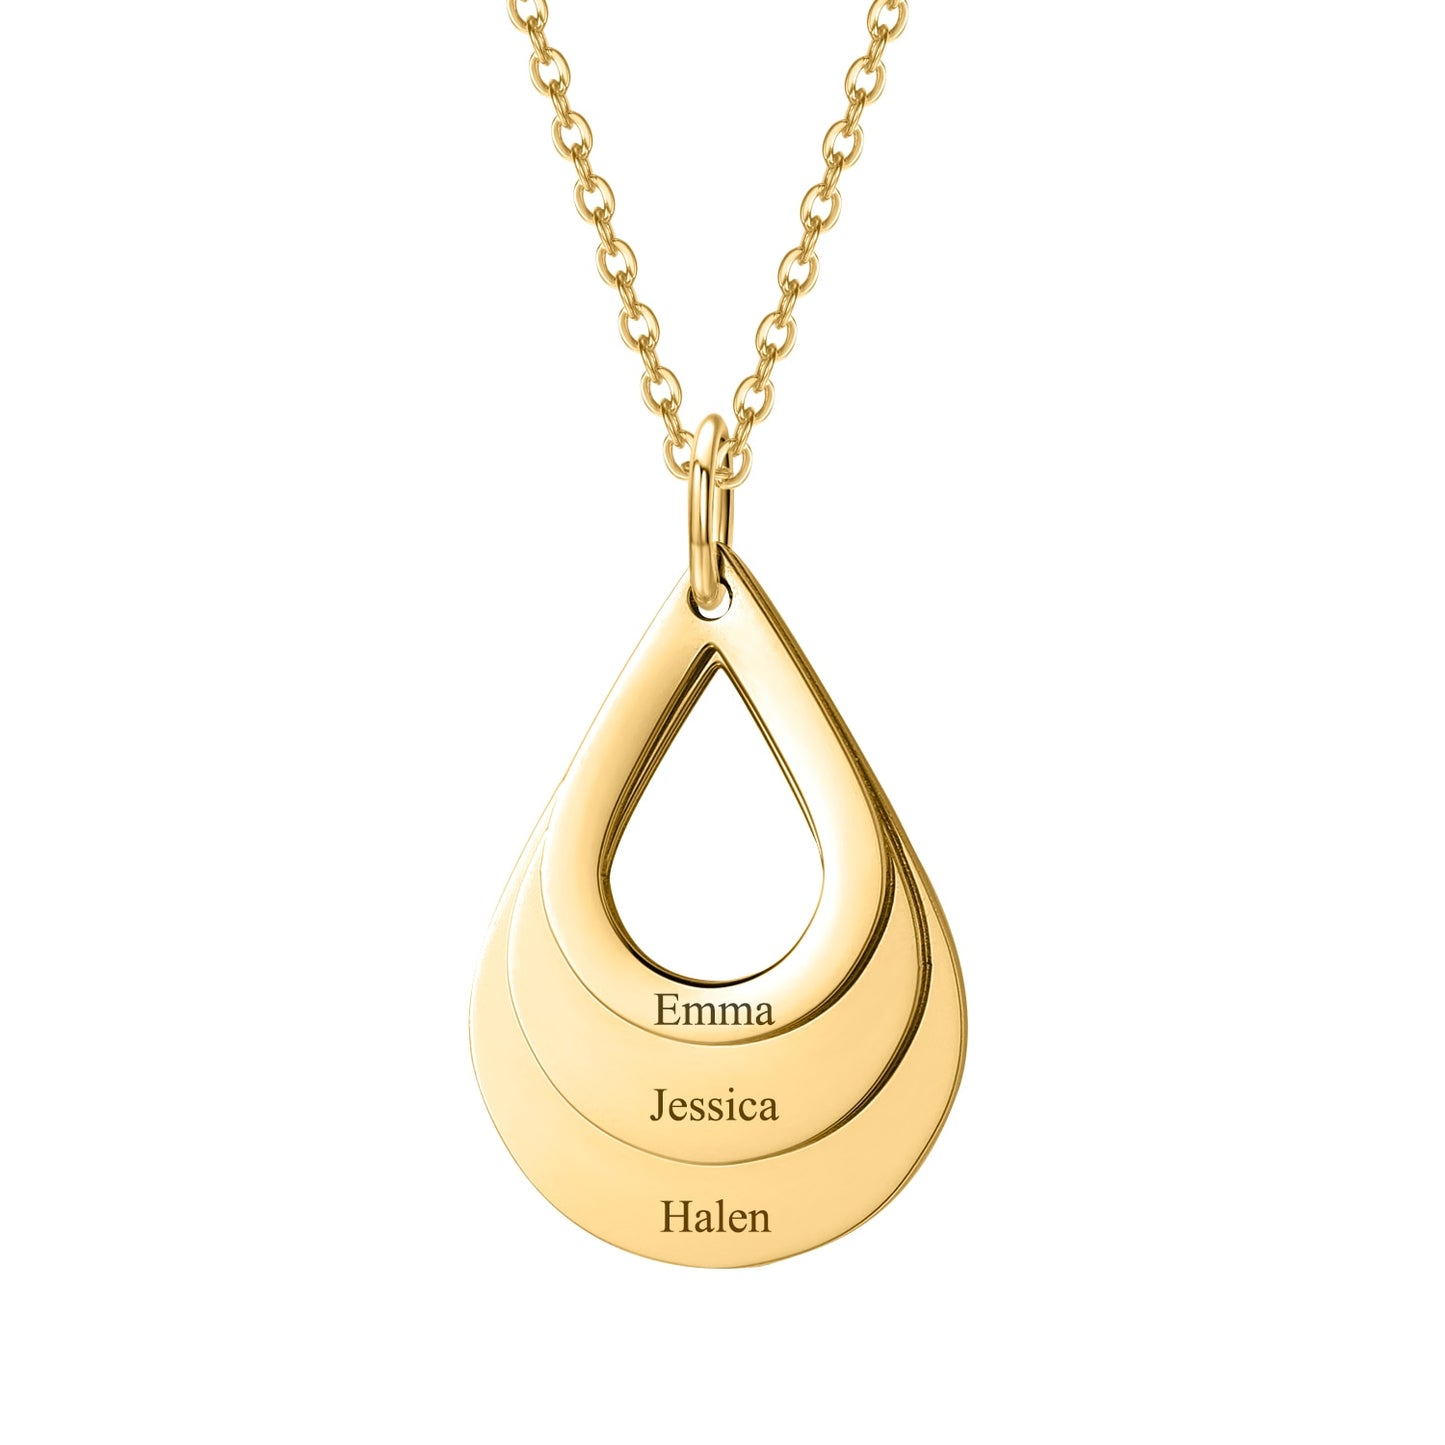 Engraved drop shaped family necklace